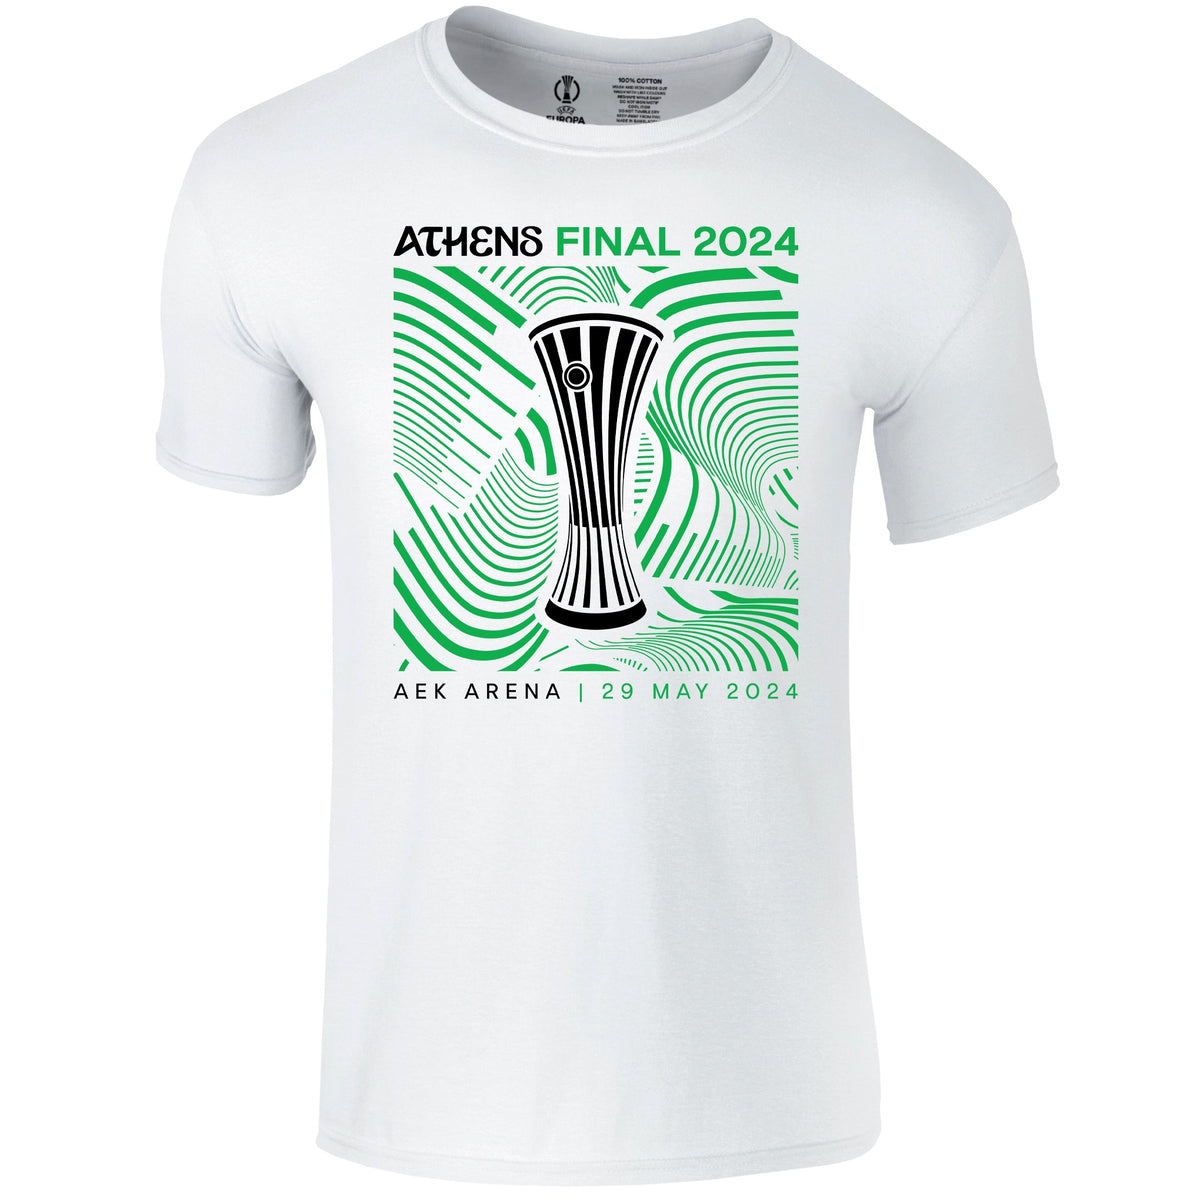 Europa Conference League Athens Final 2024 T-Shirt White